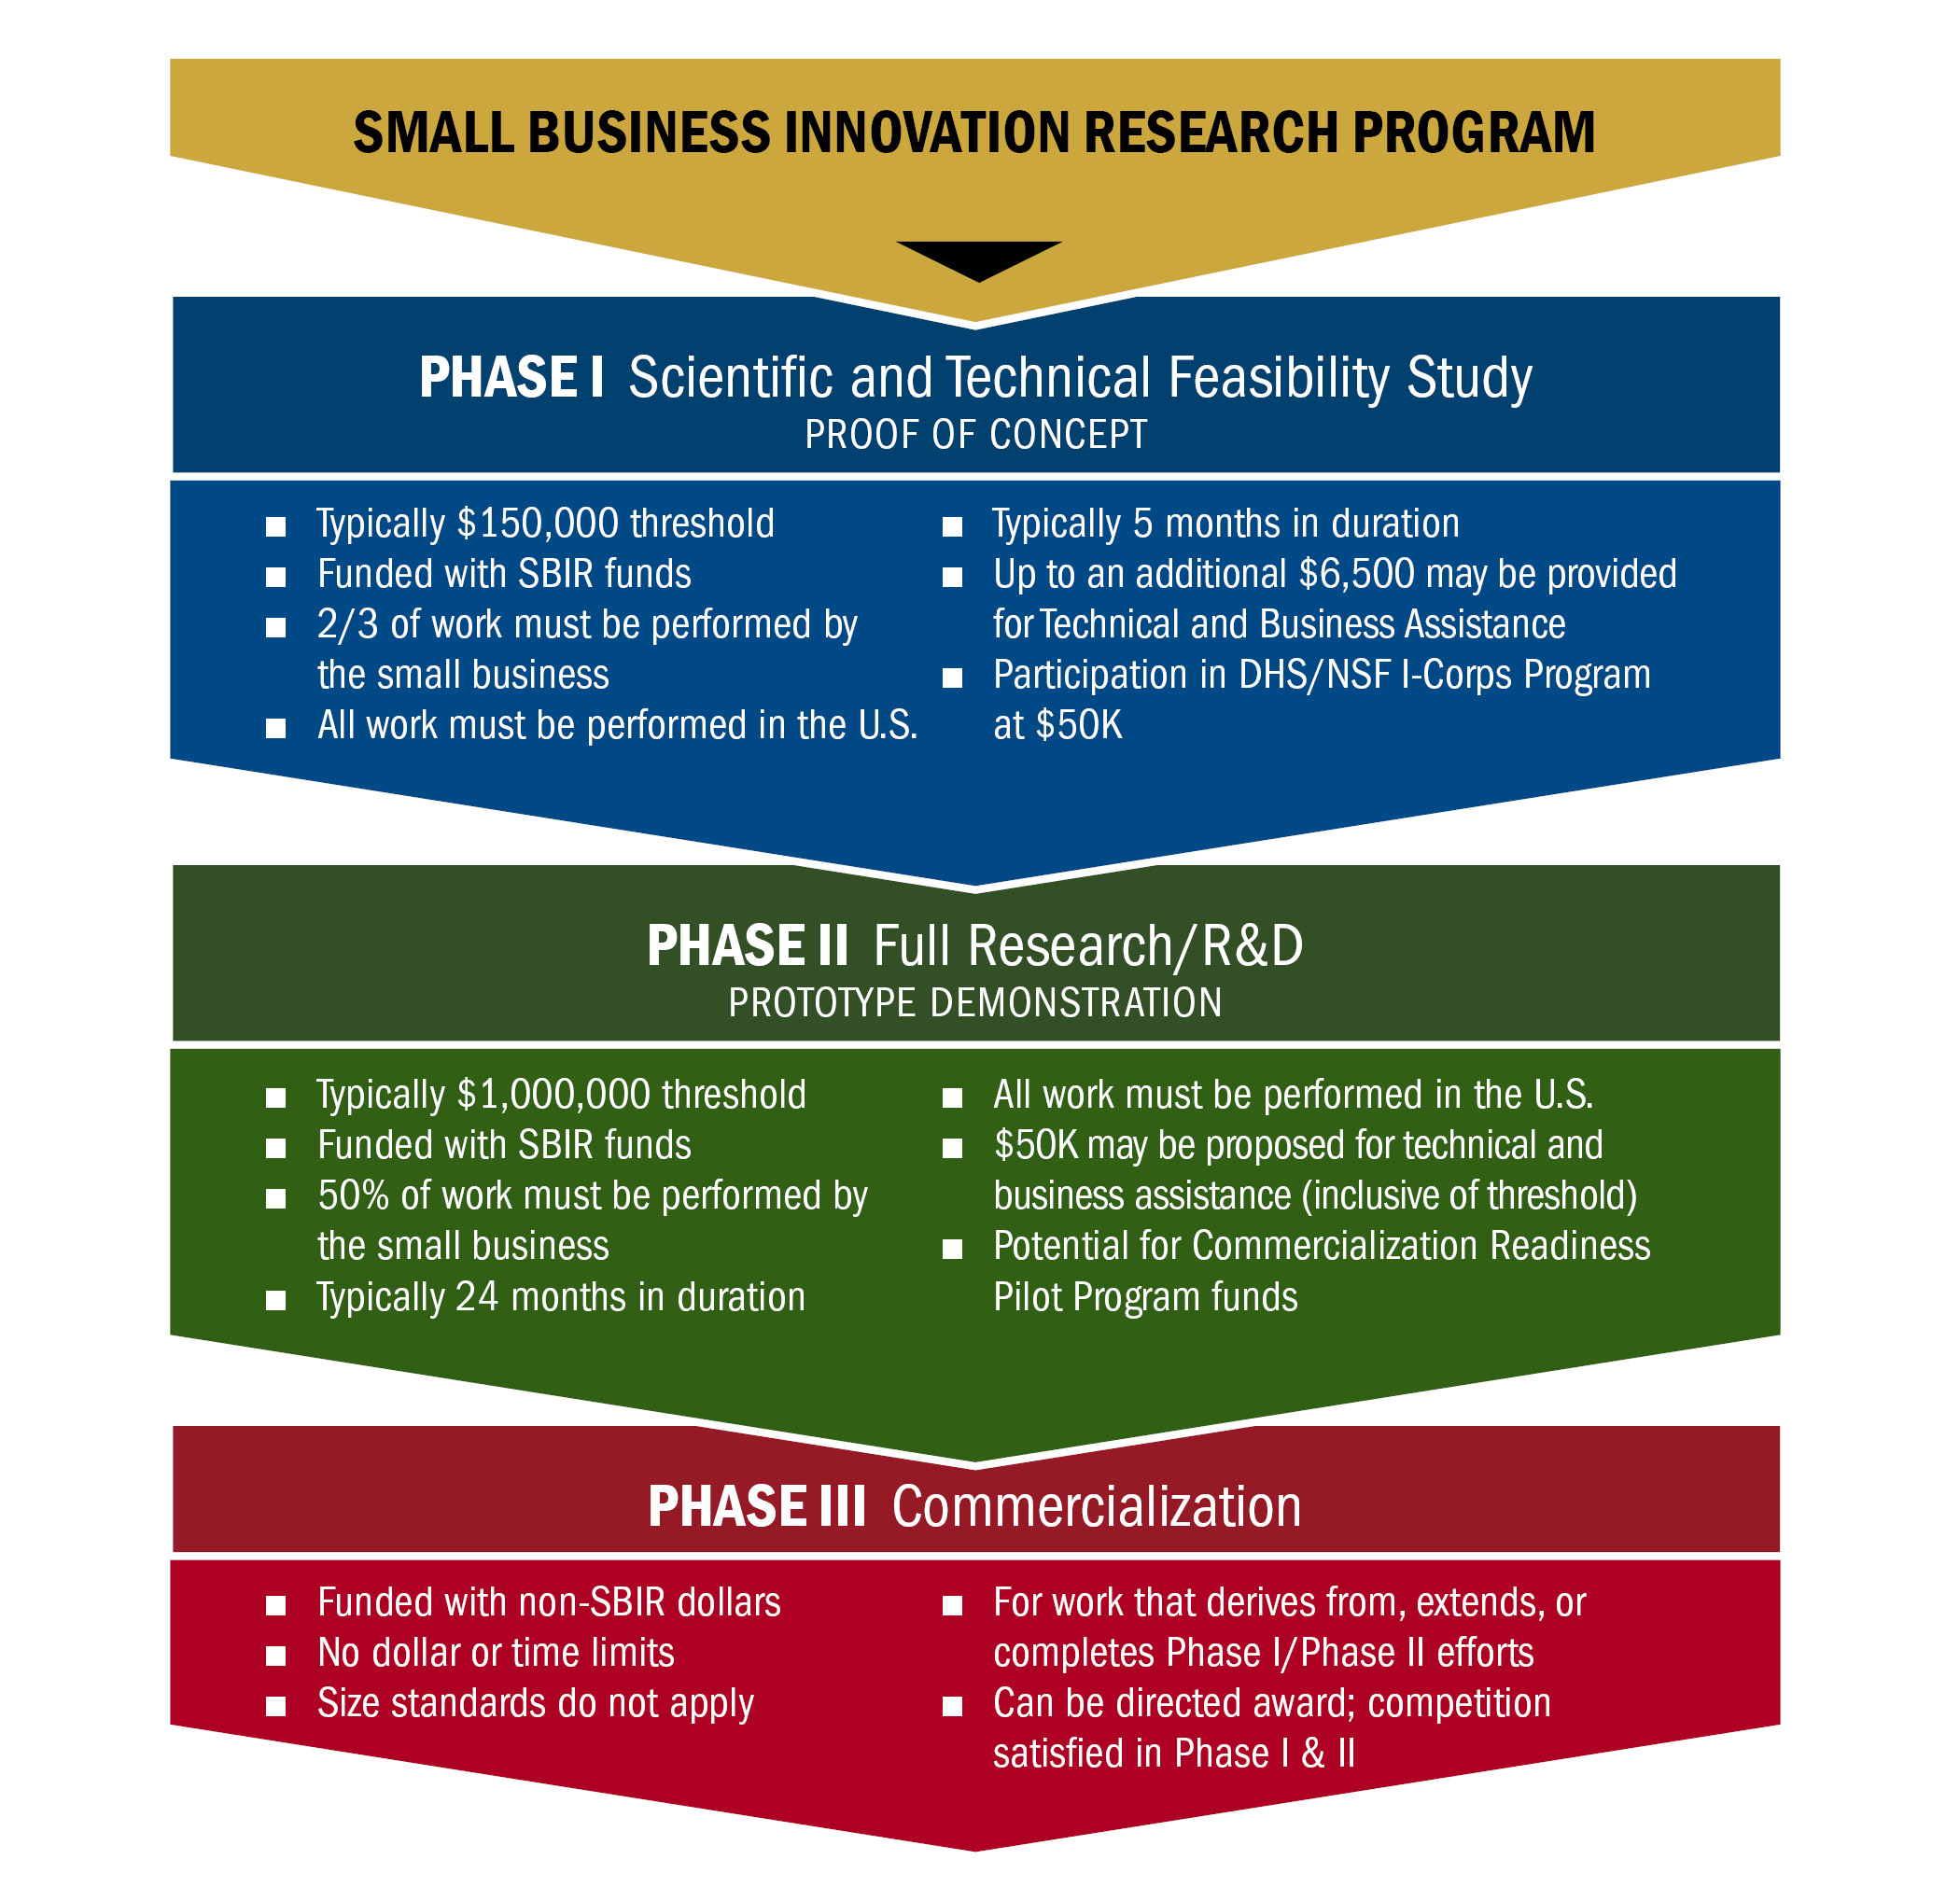 Small Business Innovation Research Program describing the three-phase competitive award system. Small Business Innovation Research Program; Phase I - Scientific and Technical Feasibility Study (Proof of Concept): Typically $150,000 threshold, Funded with SBIR funds, 2/3 of work must be performed by the small business, All work must be performed in the U.S., Typically 5 months in duration, Up to an additional $6,500 may be provided for Technical and Business Assistance, Participation in DHS/NSF I-Corps Program at $50K. Phase II Full Research R&D (Prototype Demonstration): Typically $1,000,000 threshold, Funded with SBIR funds, 50% of work must be performed by the small business, Typically 24 months in duration, All work must be performed in the U.S, $50K may be proposed for technical and business assistance (inclusive of threshold), Potential for Commercialization Readiness Pilot Program Funds. Phase III Commercialization: Funded with non-SBIR dollars, No dollar or time limits, Size standards do not apply, For work that derives from, extends or completes Phase I/Phase II efforts, Can be directed award; competition satisfied in Phase I & II.